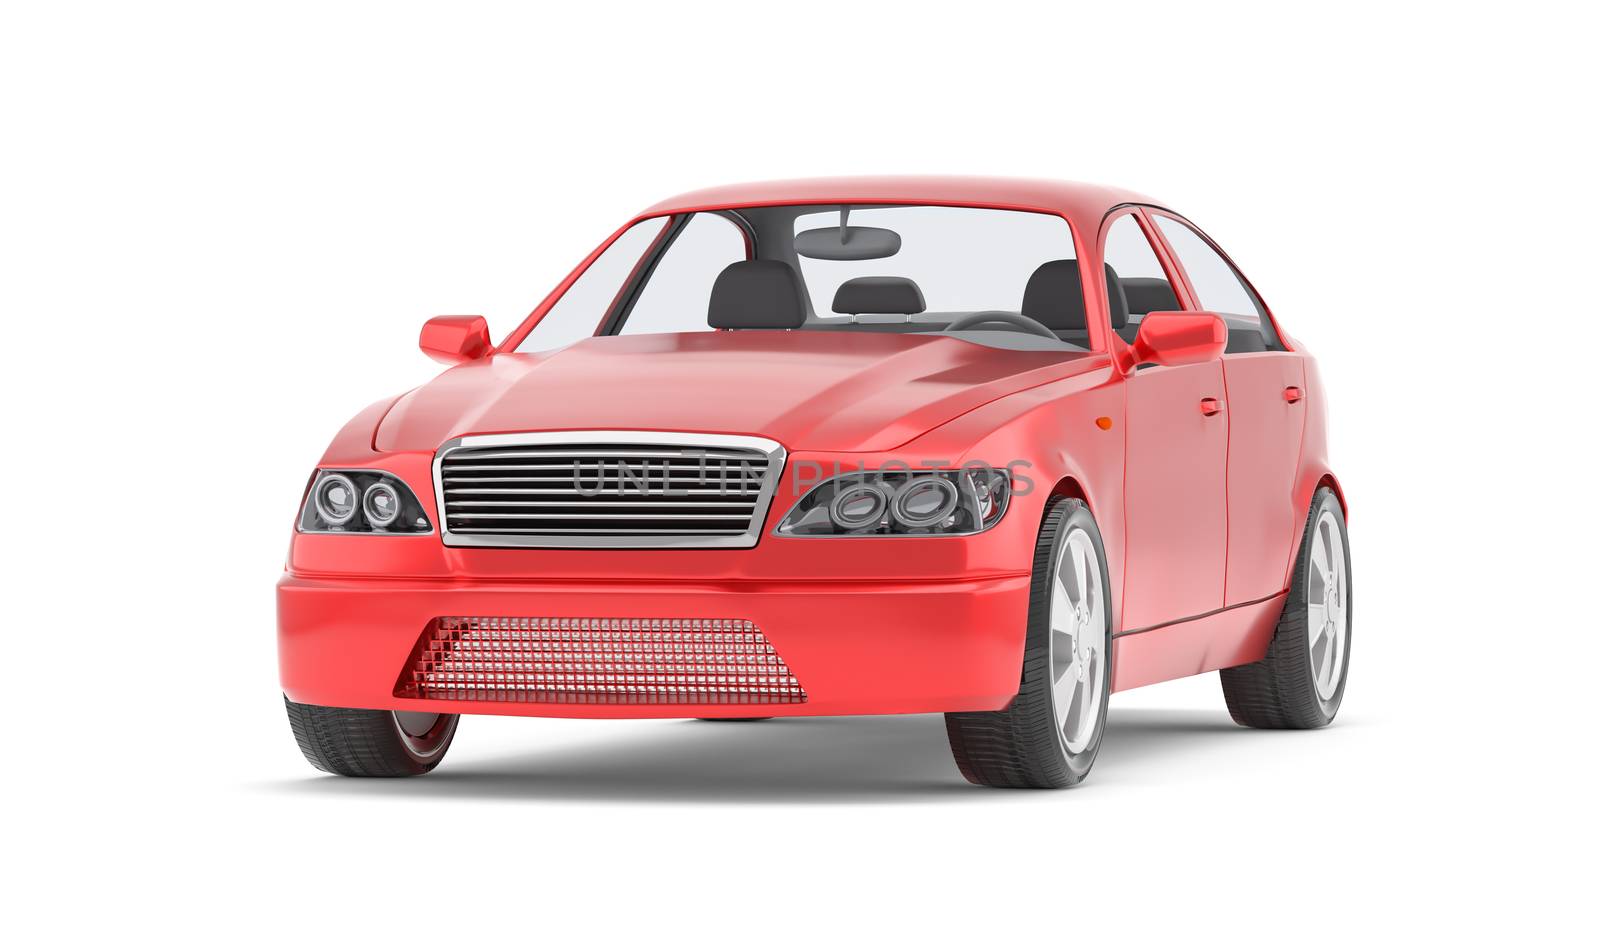 Brandless Generic Red Car. Isolated On White Background. 3D Illustration